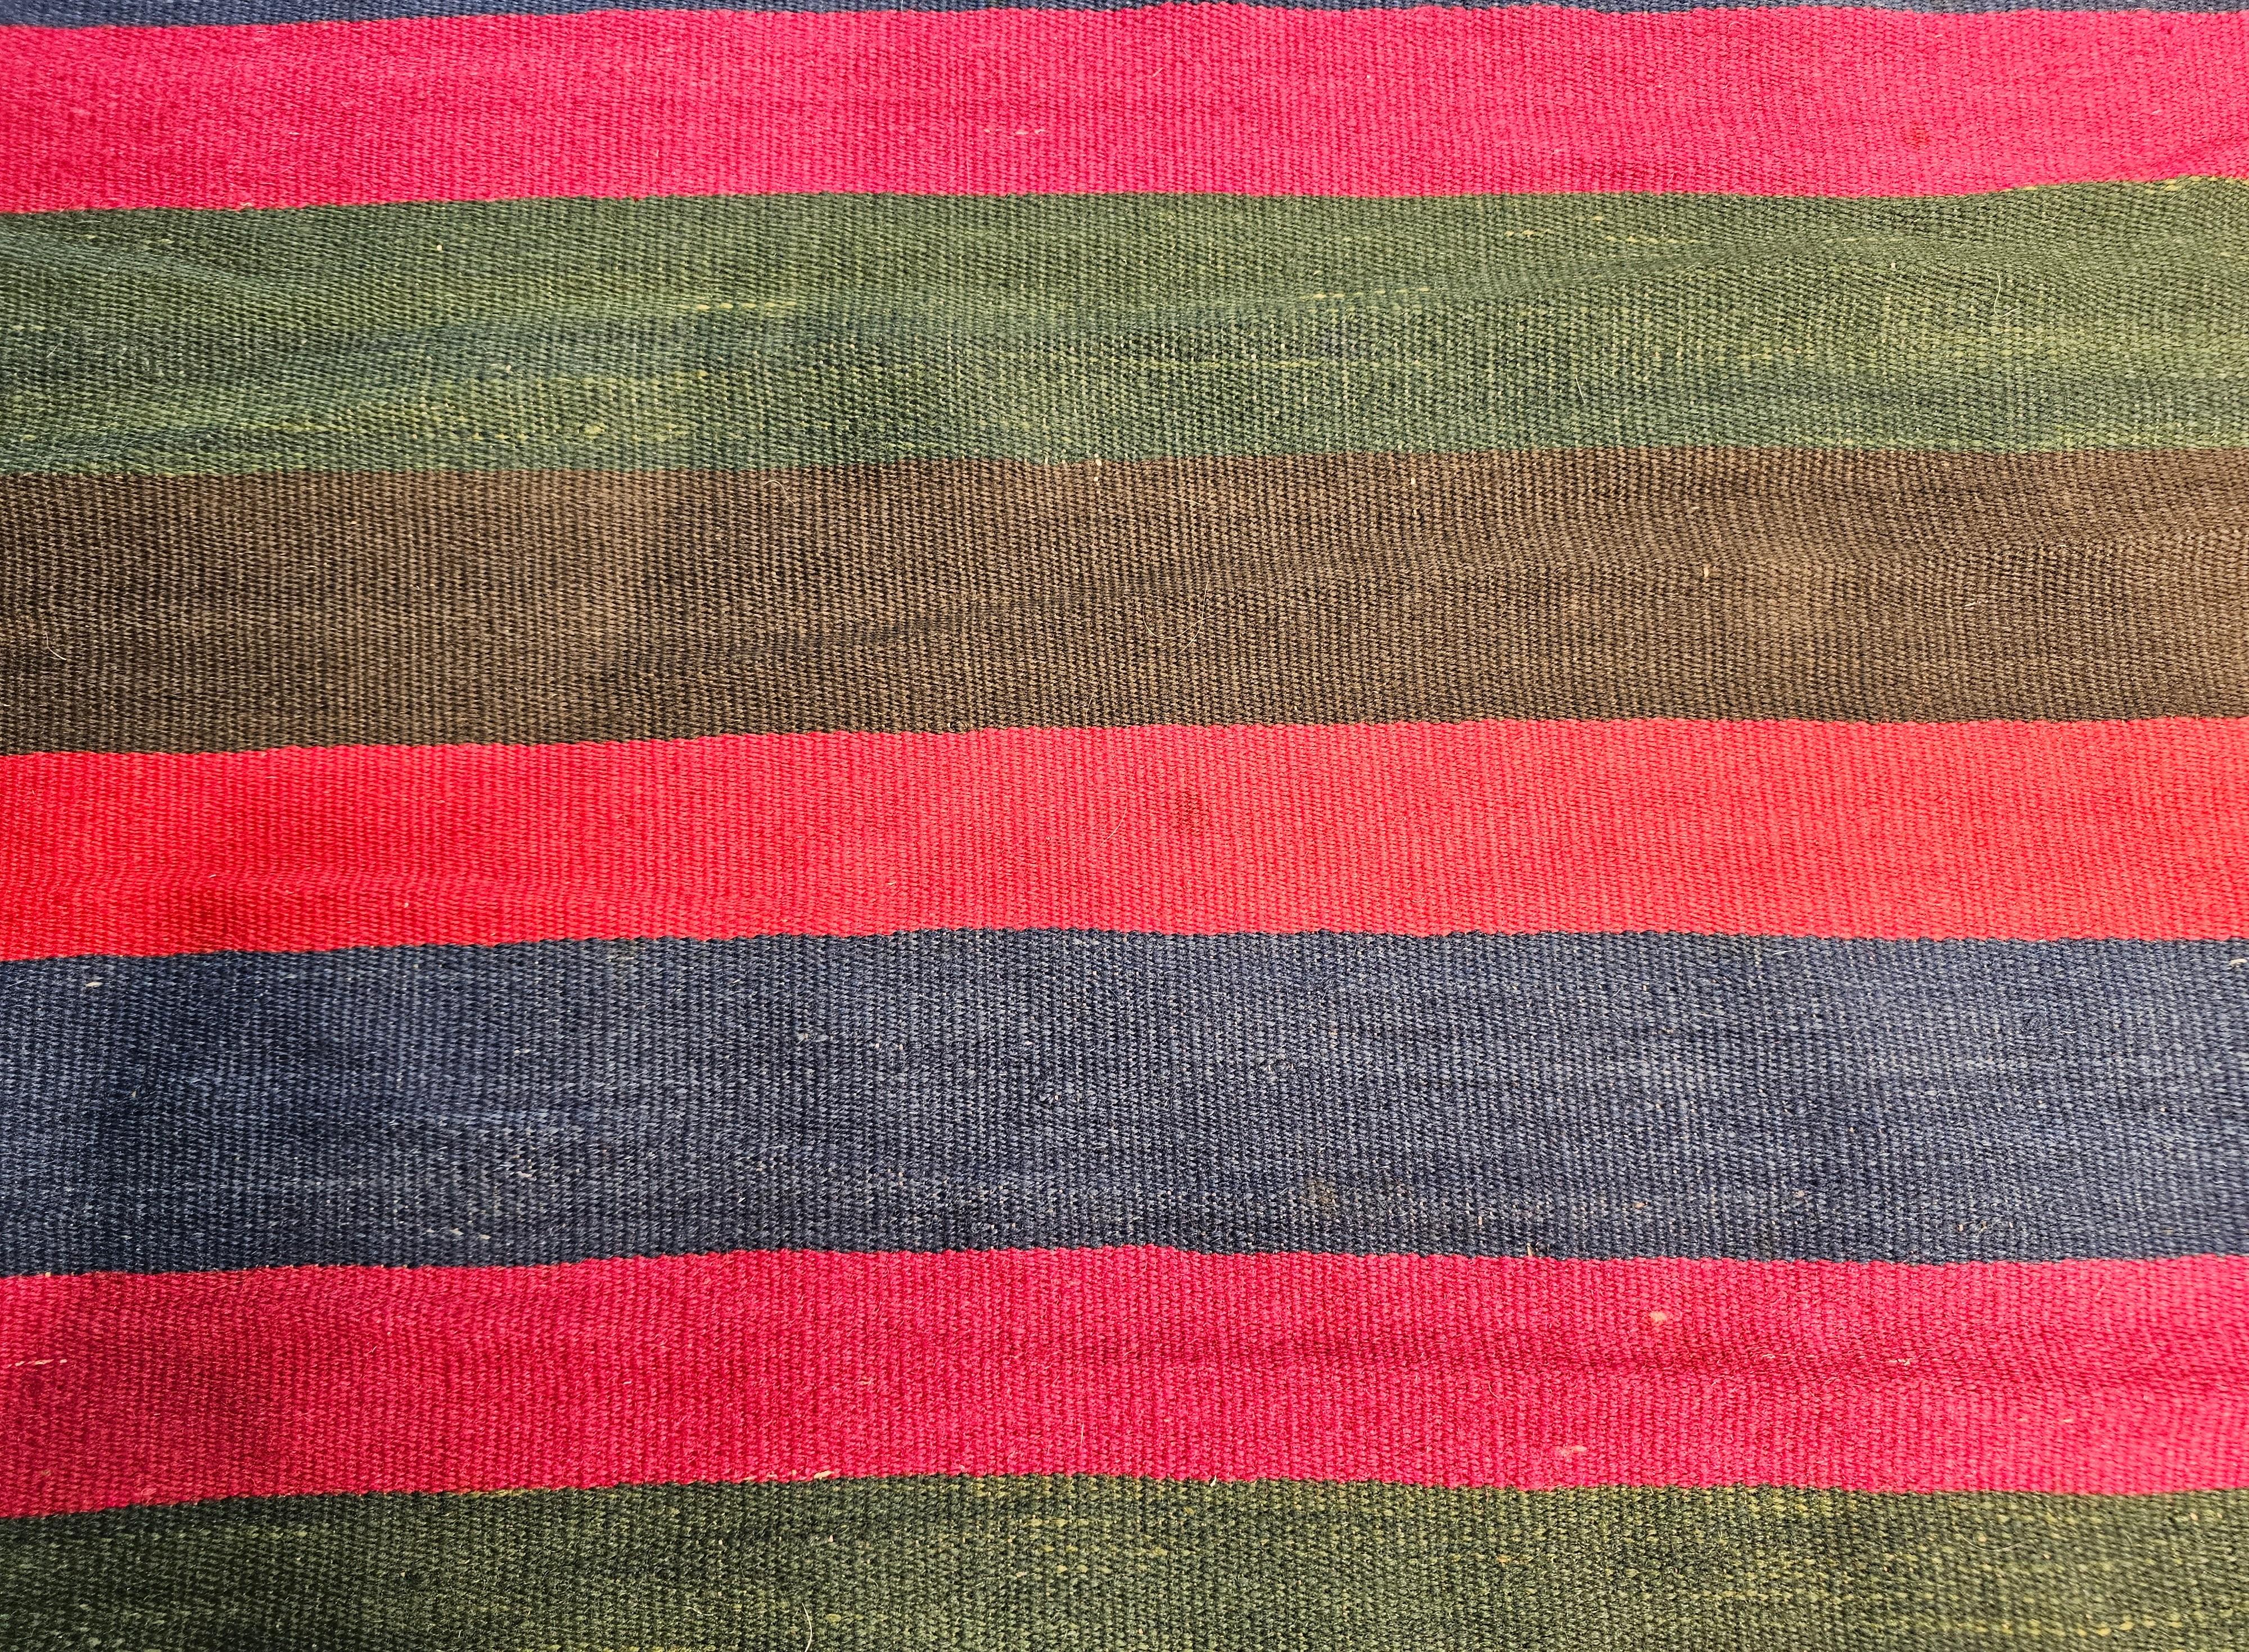 Vintage South American Hand-woven Kilim in Stripe Pattern in Magenta, Blue, Red For Sale 3